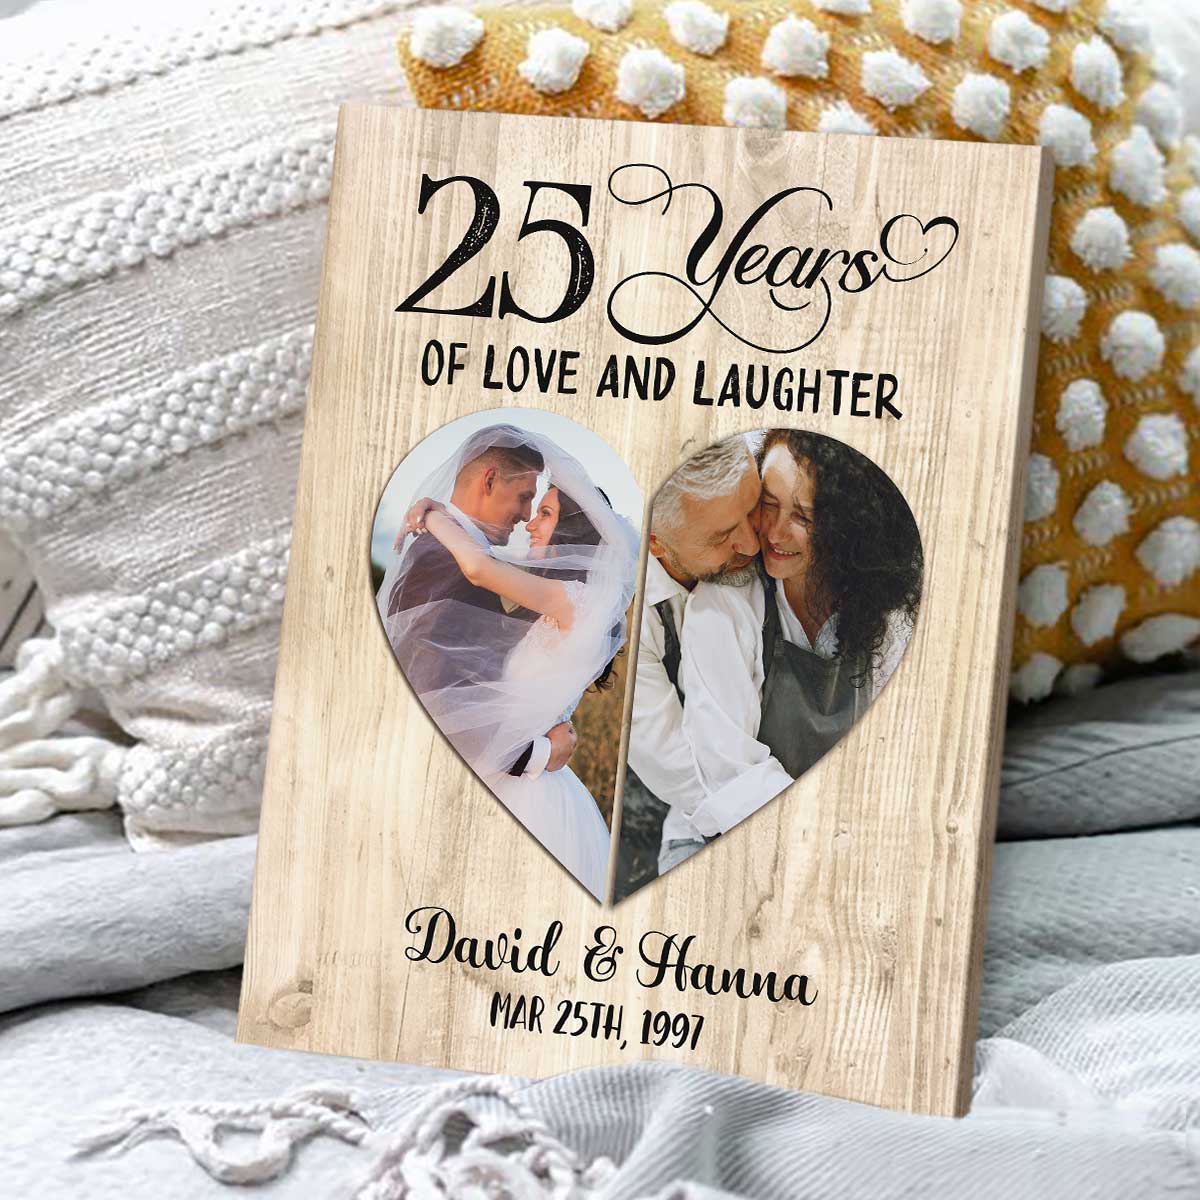 Amazon.com: Custom Wedding Vows Framed, Wedding Vows Gift, Anniversary Gift  For Husband, Gift For Wife, His and Hers Wedding Gift : Handmade Products